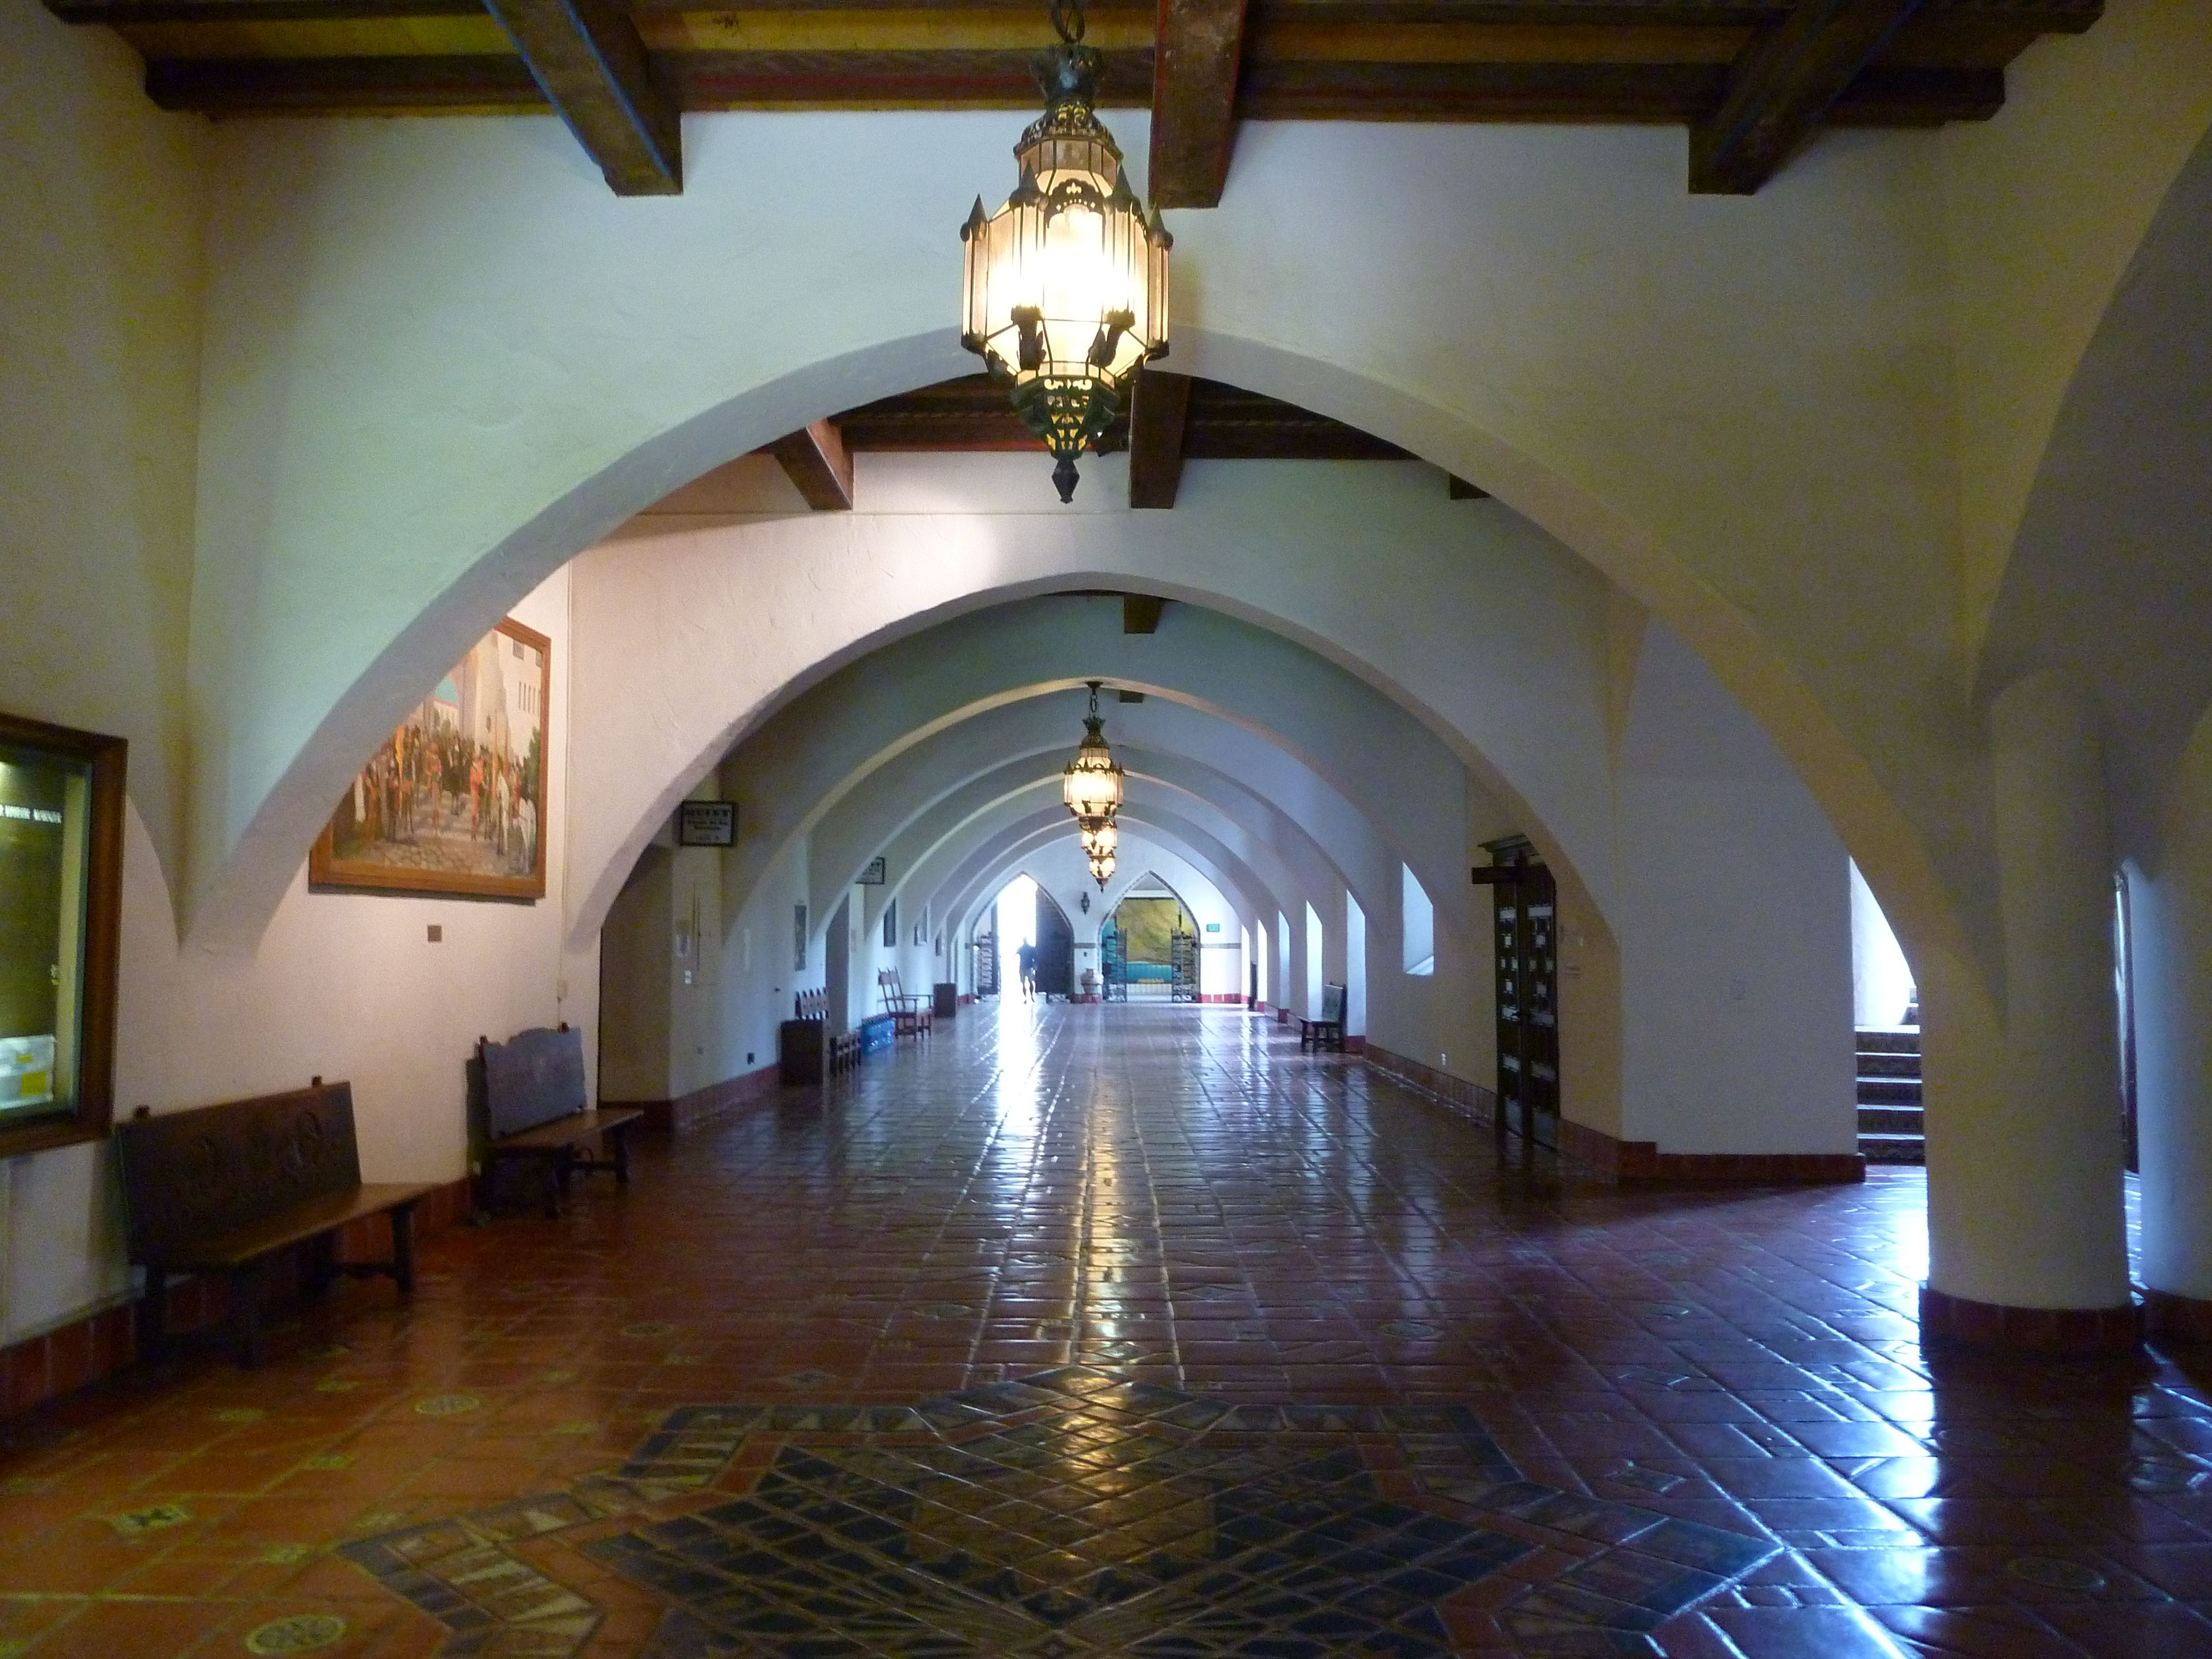 Interior hallway of the Spanish Colonial revival style Santa Barbara County Courthouse, with expansive archways, vintage light fixtures, and polished Saltillo tile floor